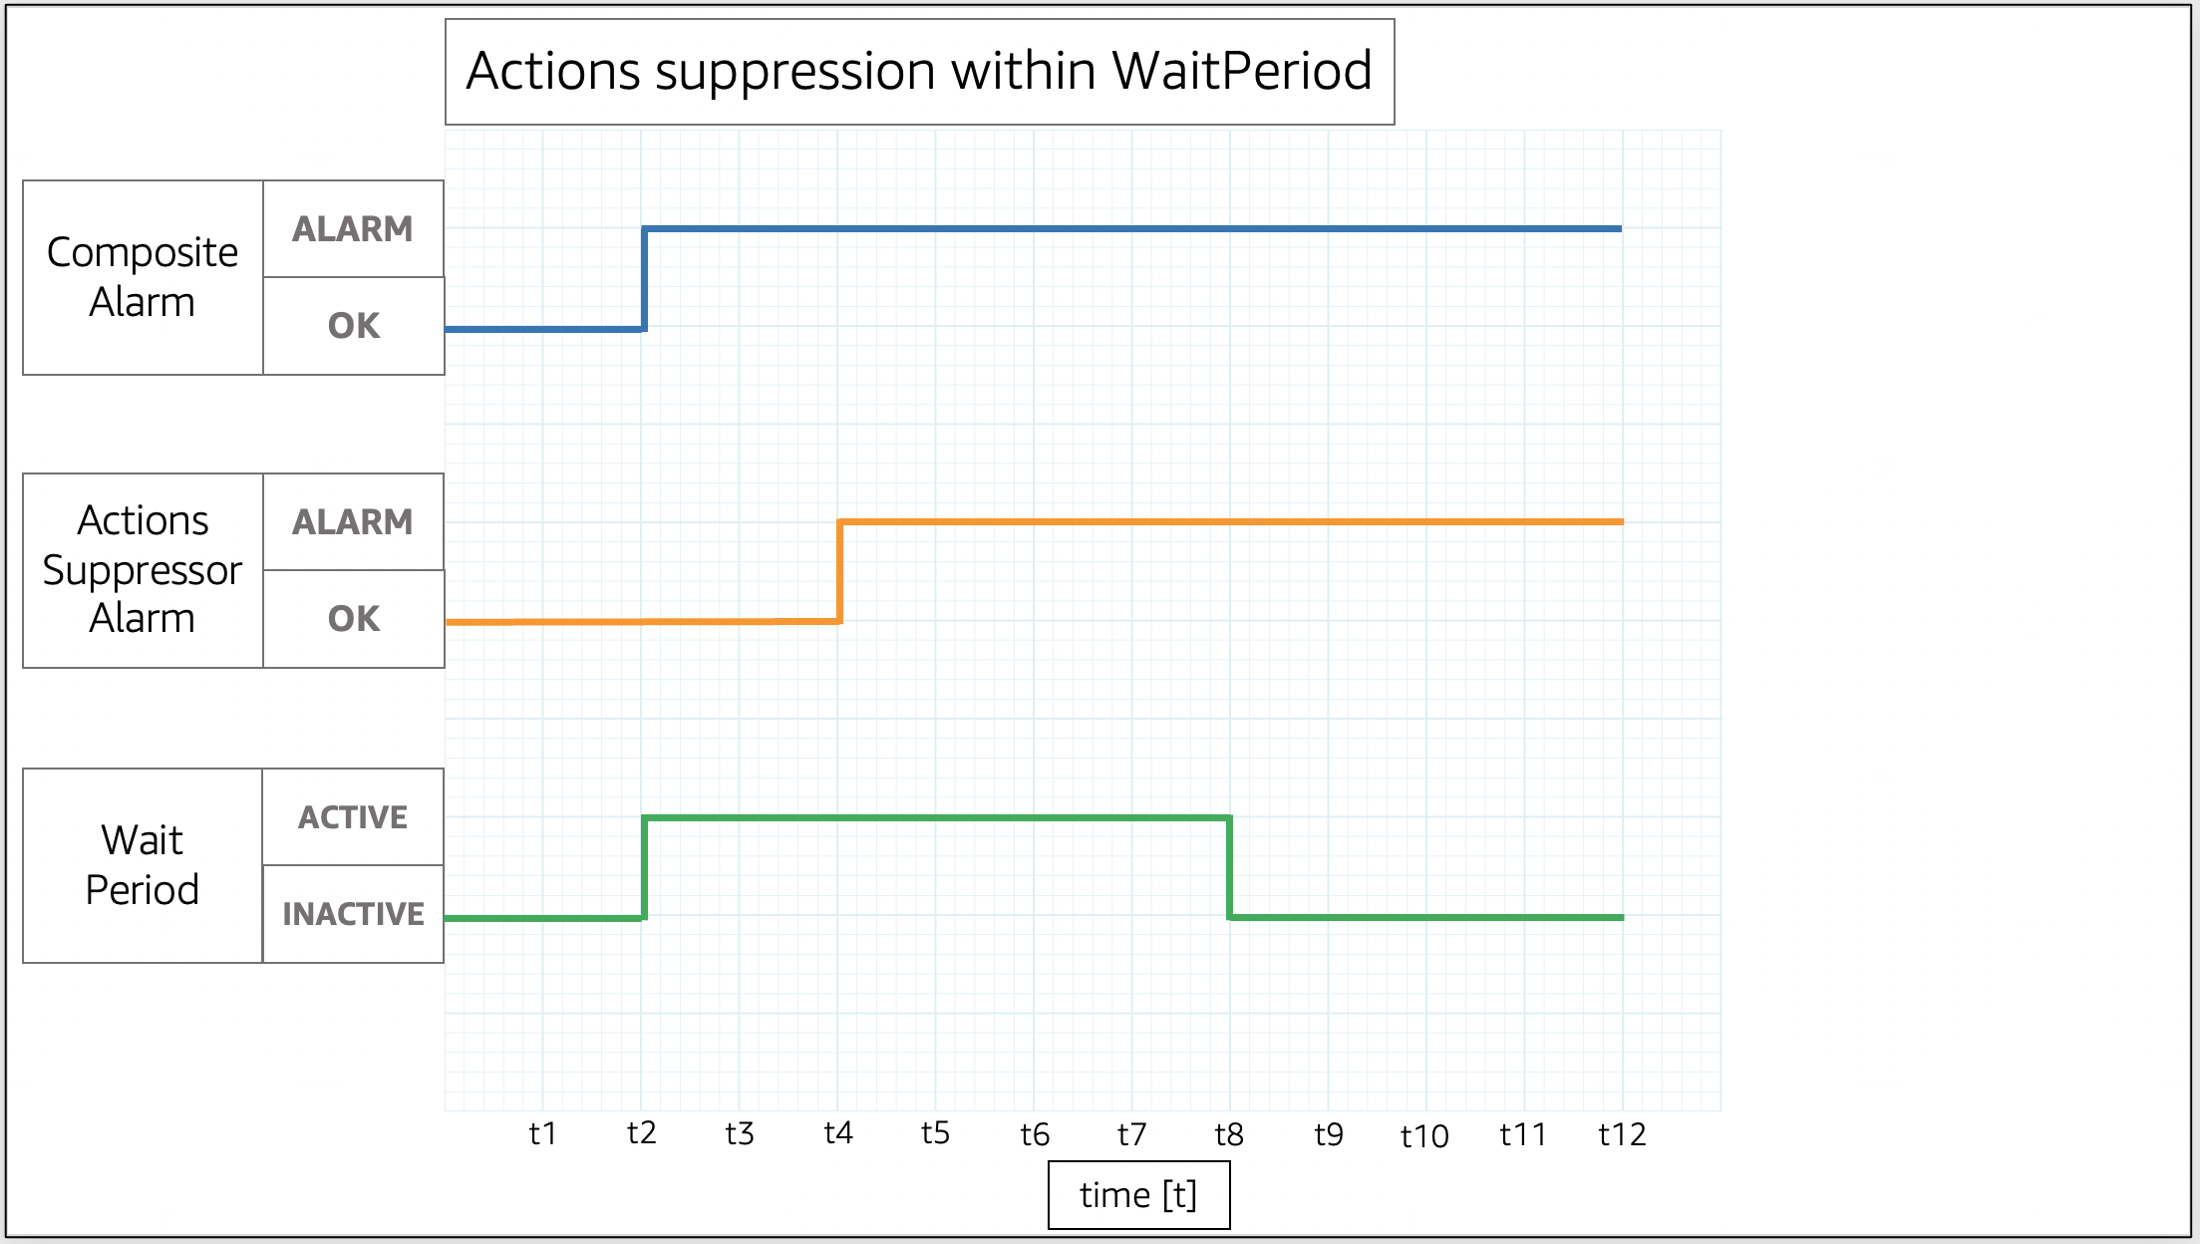 Actions suppression within WaitPeriod